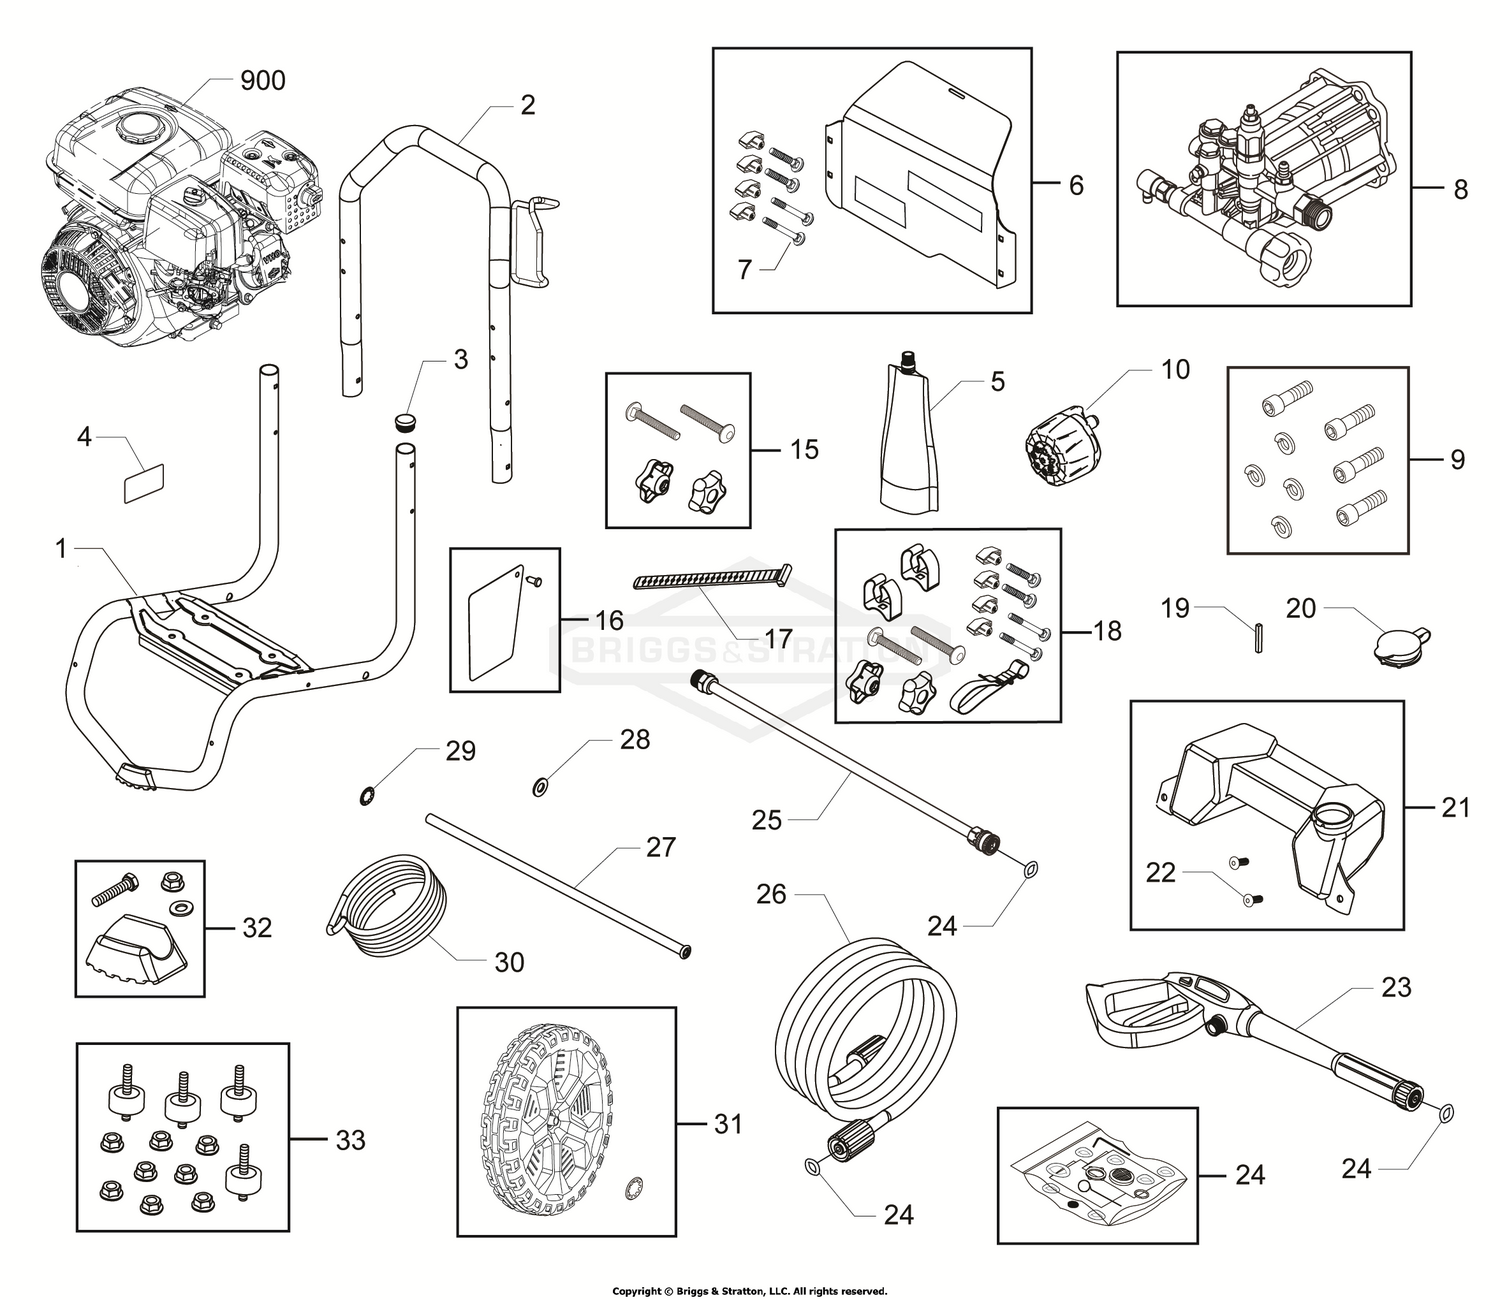 Briggs and Stratton Power Products 020449-0 - 3,300 PSI John Deere Parts  Diagrams